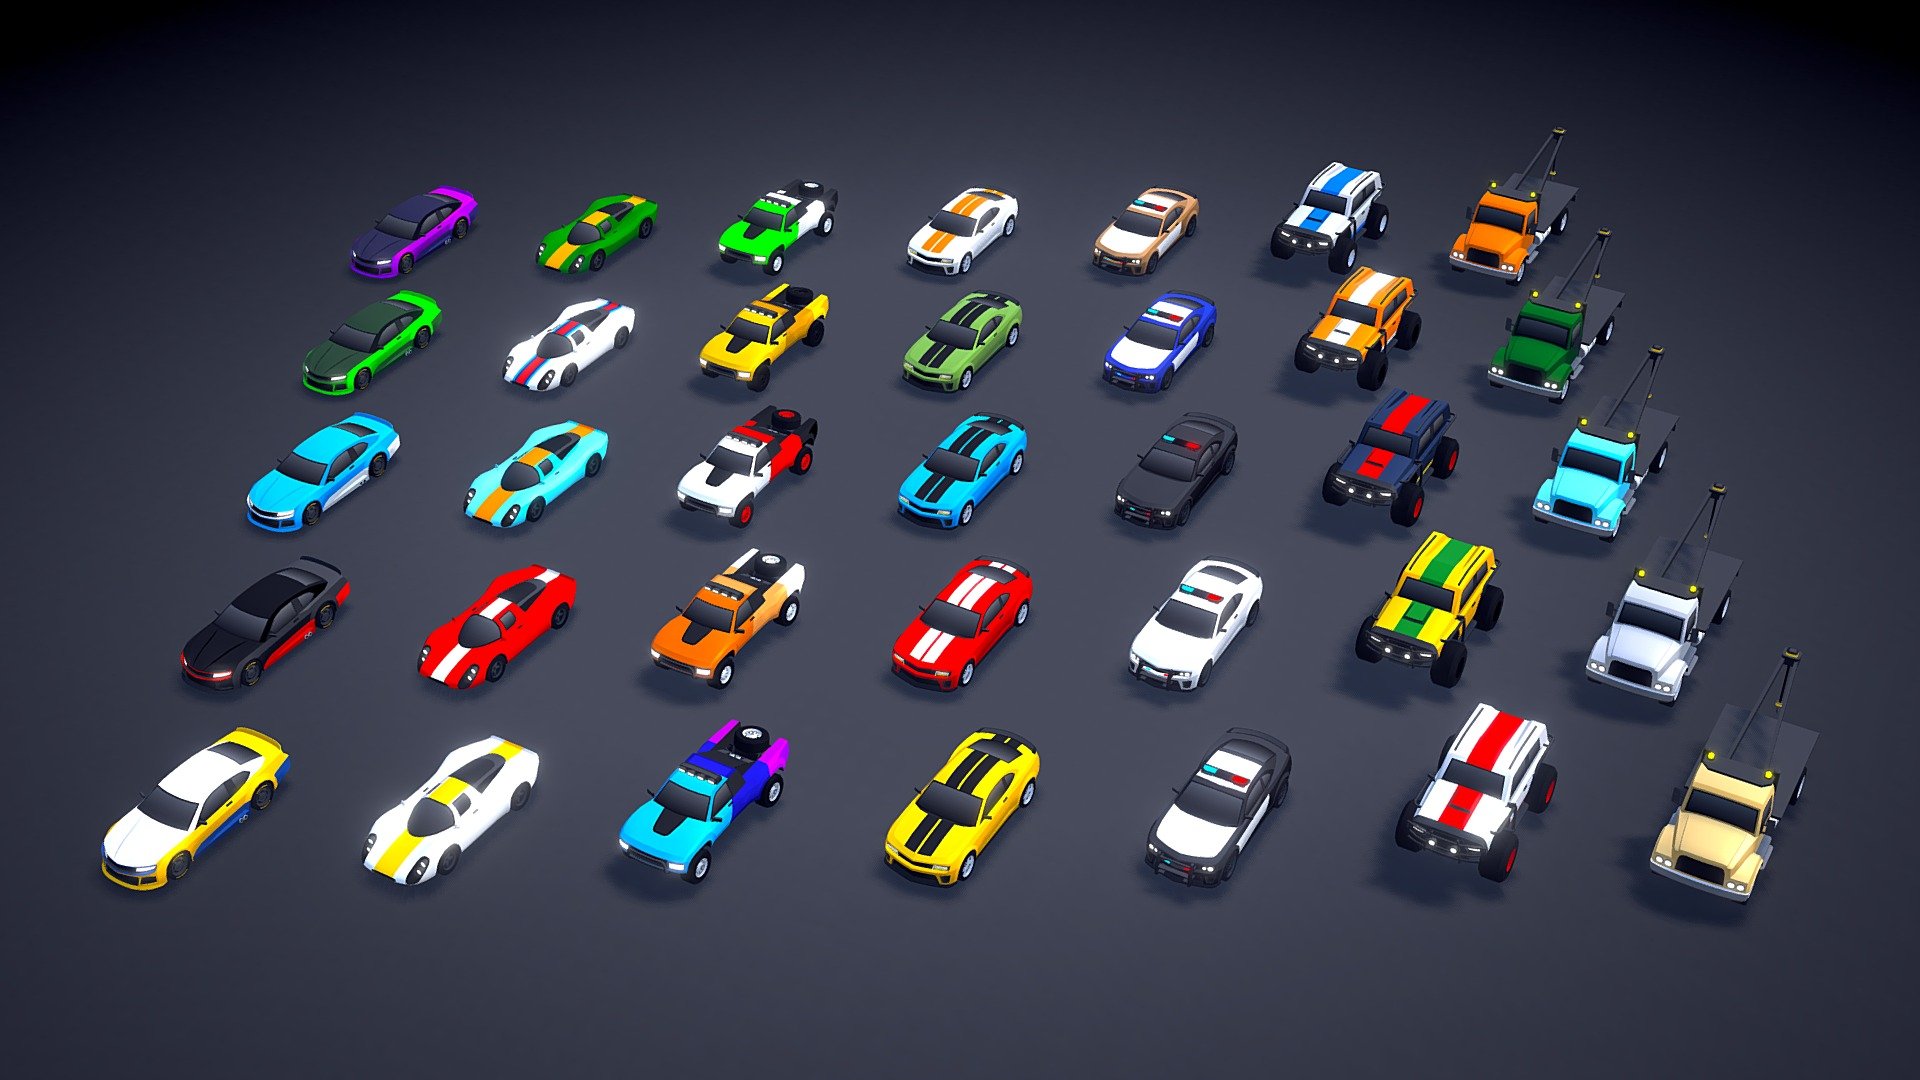 This is the (free) May update of my asset called ARCADE: Ultimate Vehicles Pack. This update will be launched on May 4th. Available in Unity3D (in the Unity Asset Store) and Sketchfab! (FBX + UNITY Files included).

The update includes 7 new vehicles (racing cars, off-road vehicles, and more).

Best regards, Mena 3d model